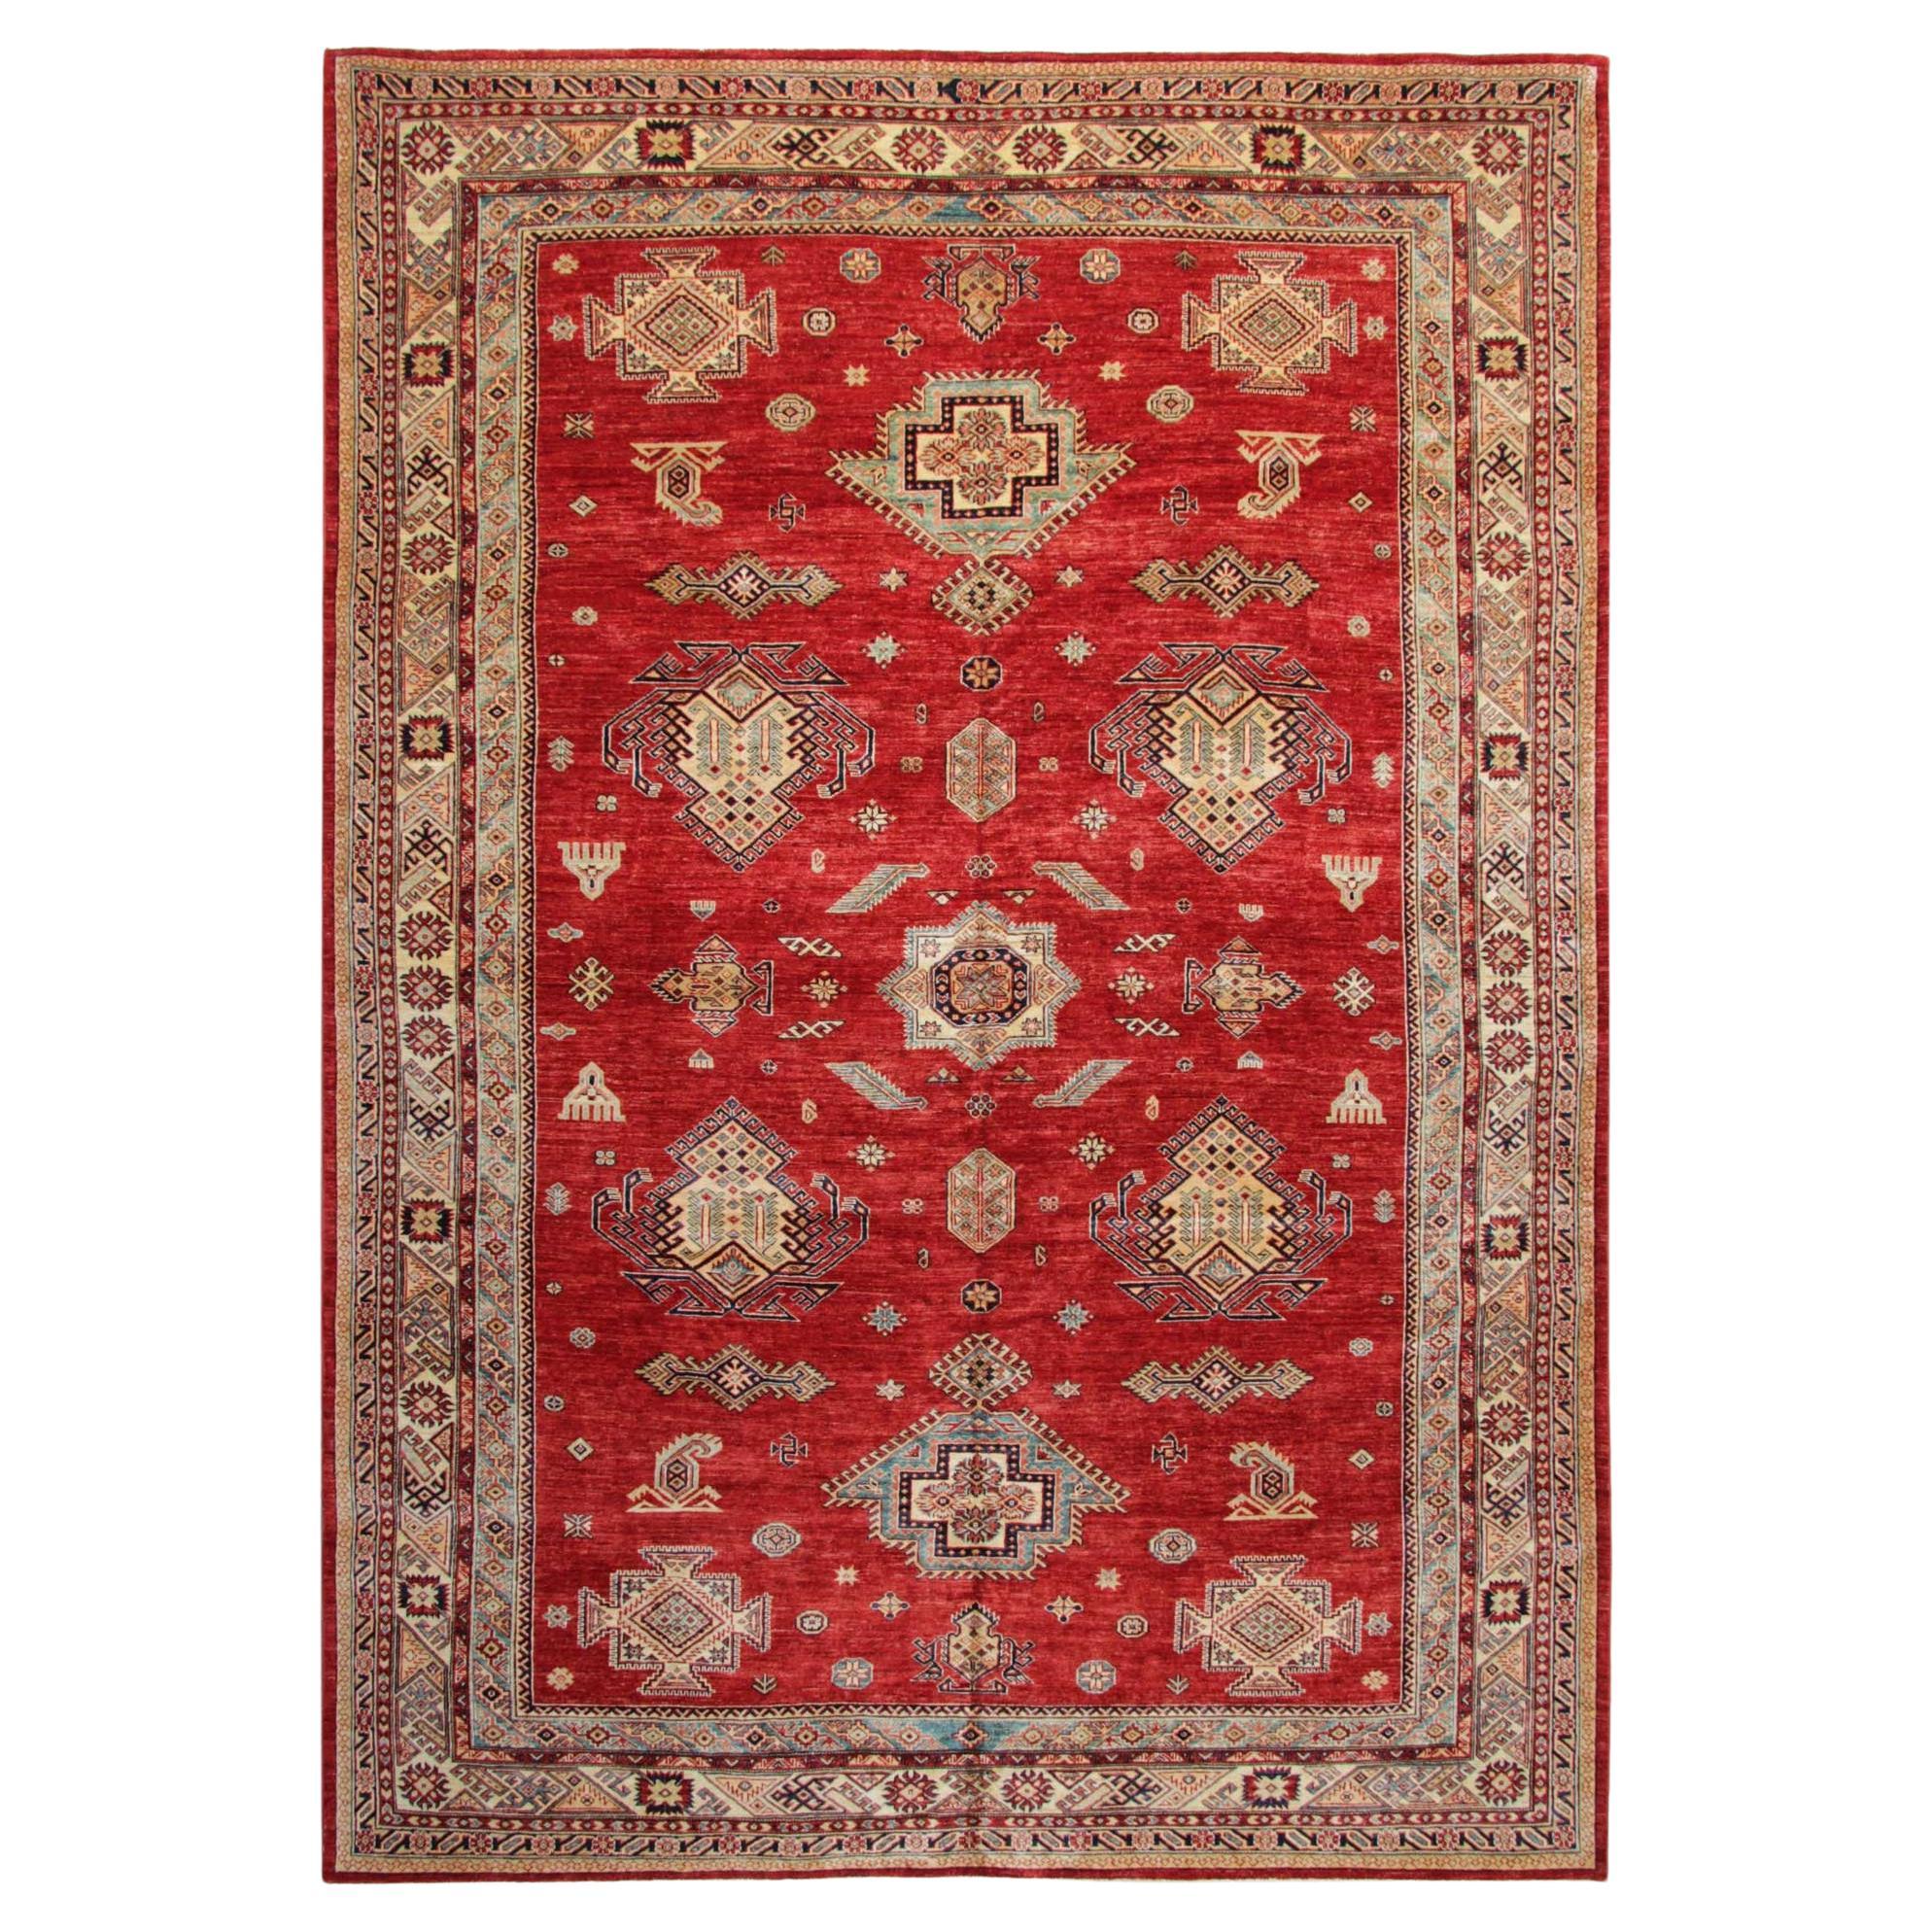 Oriental Rugs, Large Handmade Carpet Red Rugs, Traditional Rugs Sale For Sale